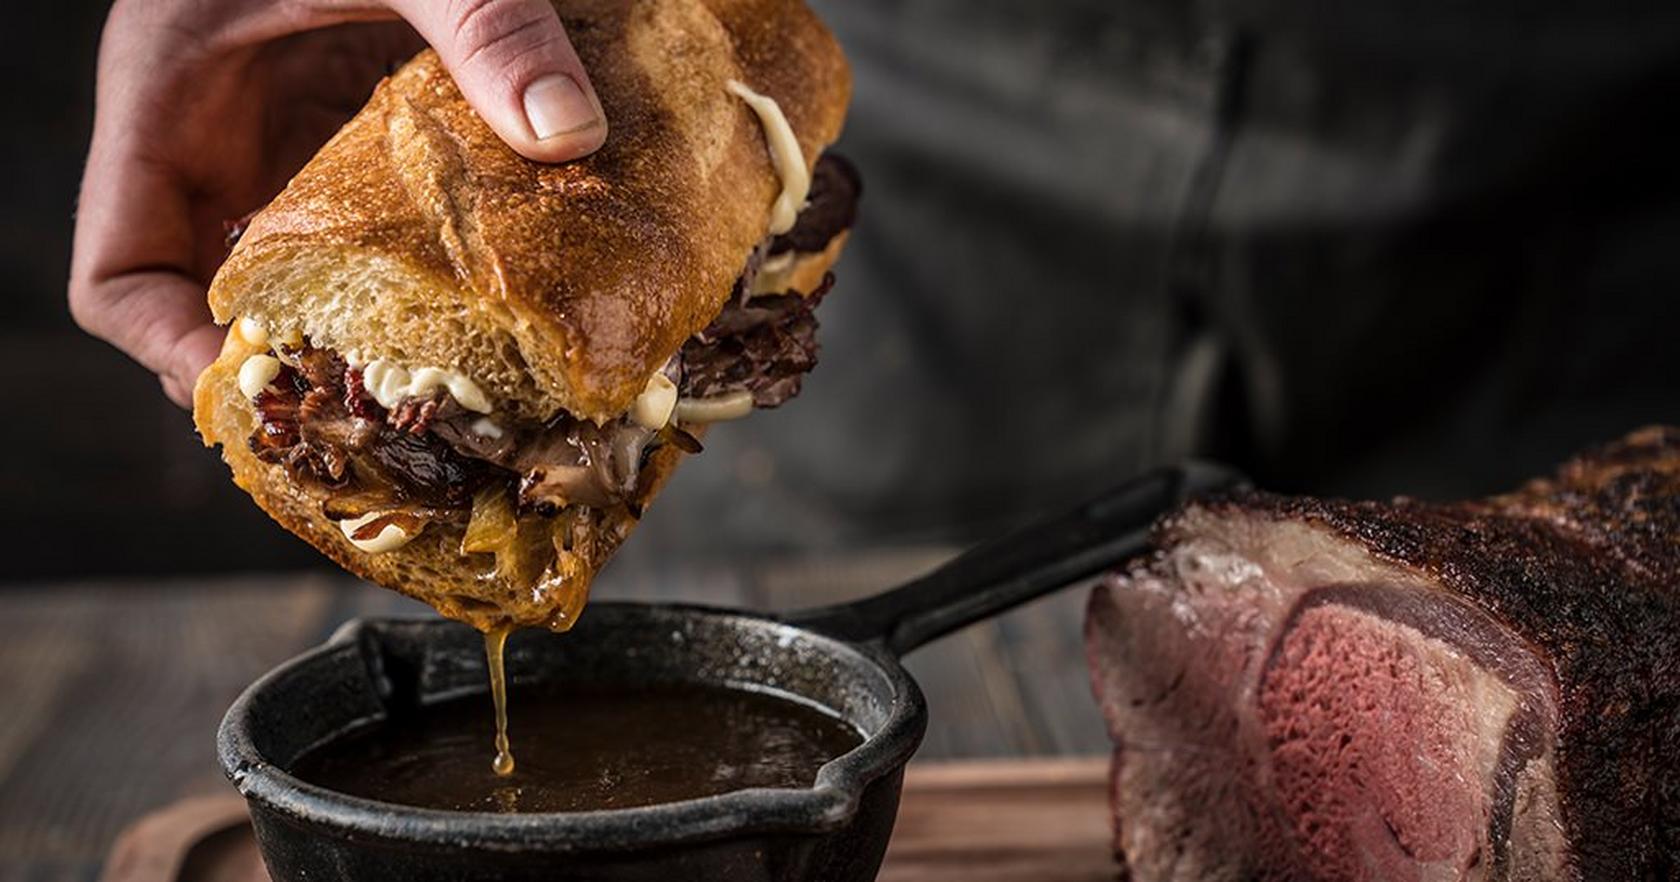 10 Ideas for What to Do with Leftover Prime Rib